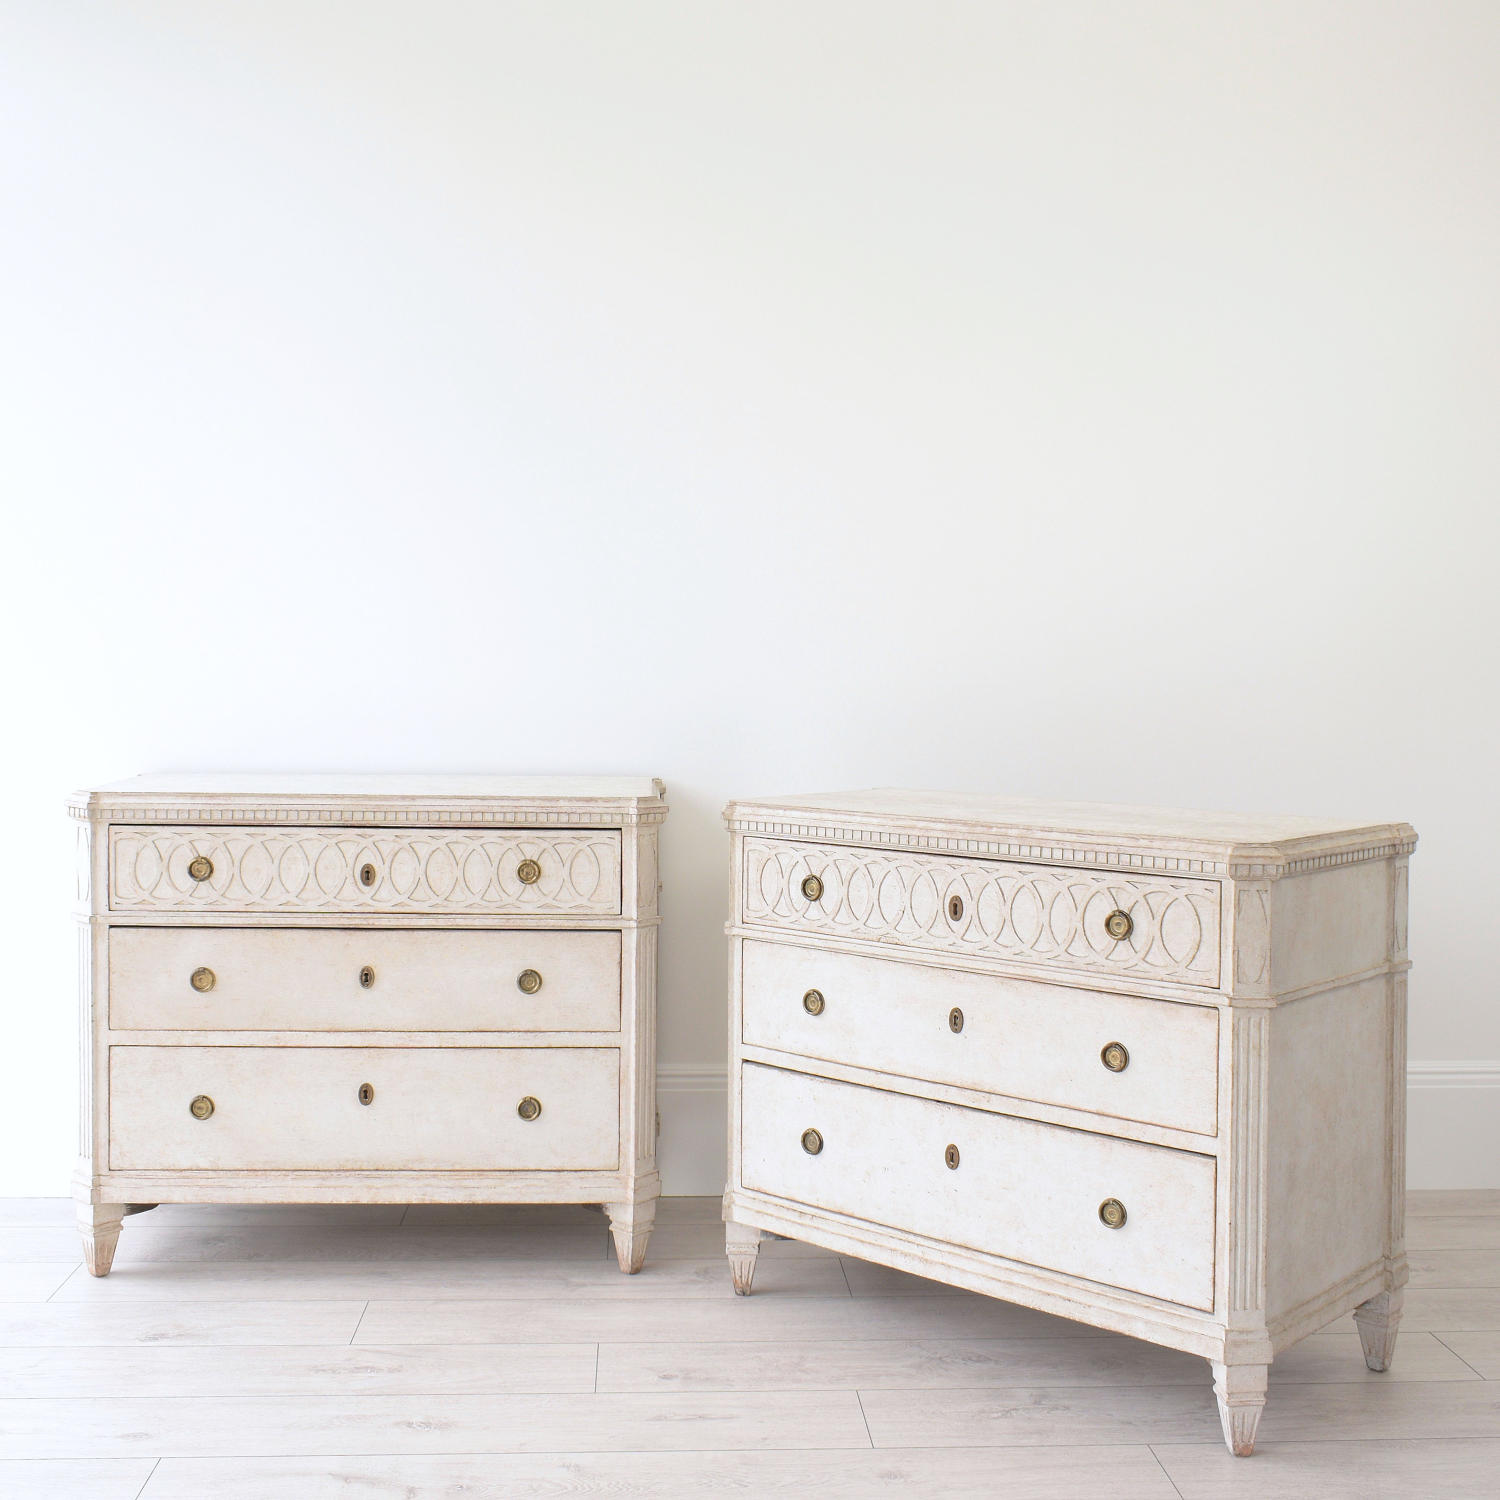 PAIR OF RICHLY CARVED GUSTAVIAN STYLE CHESTS